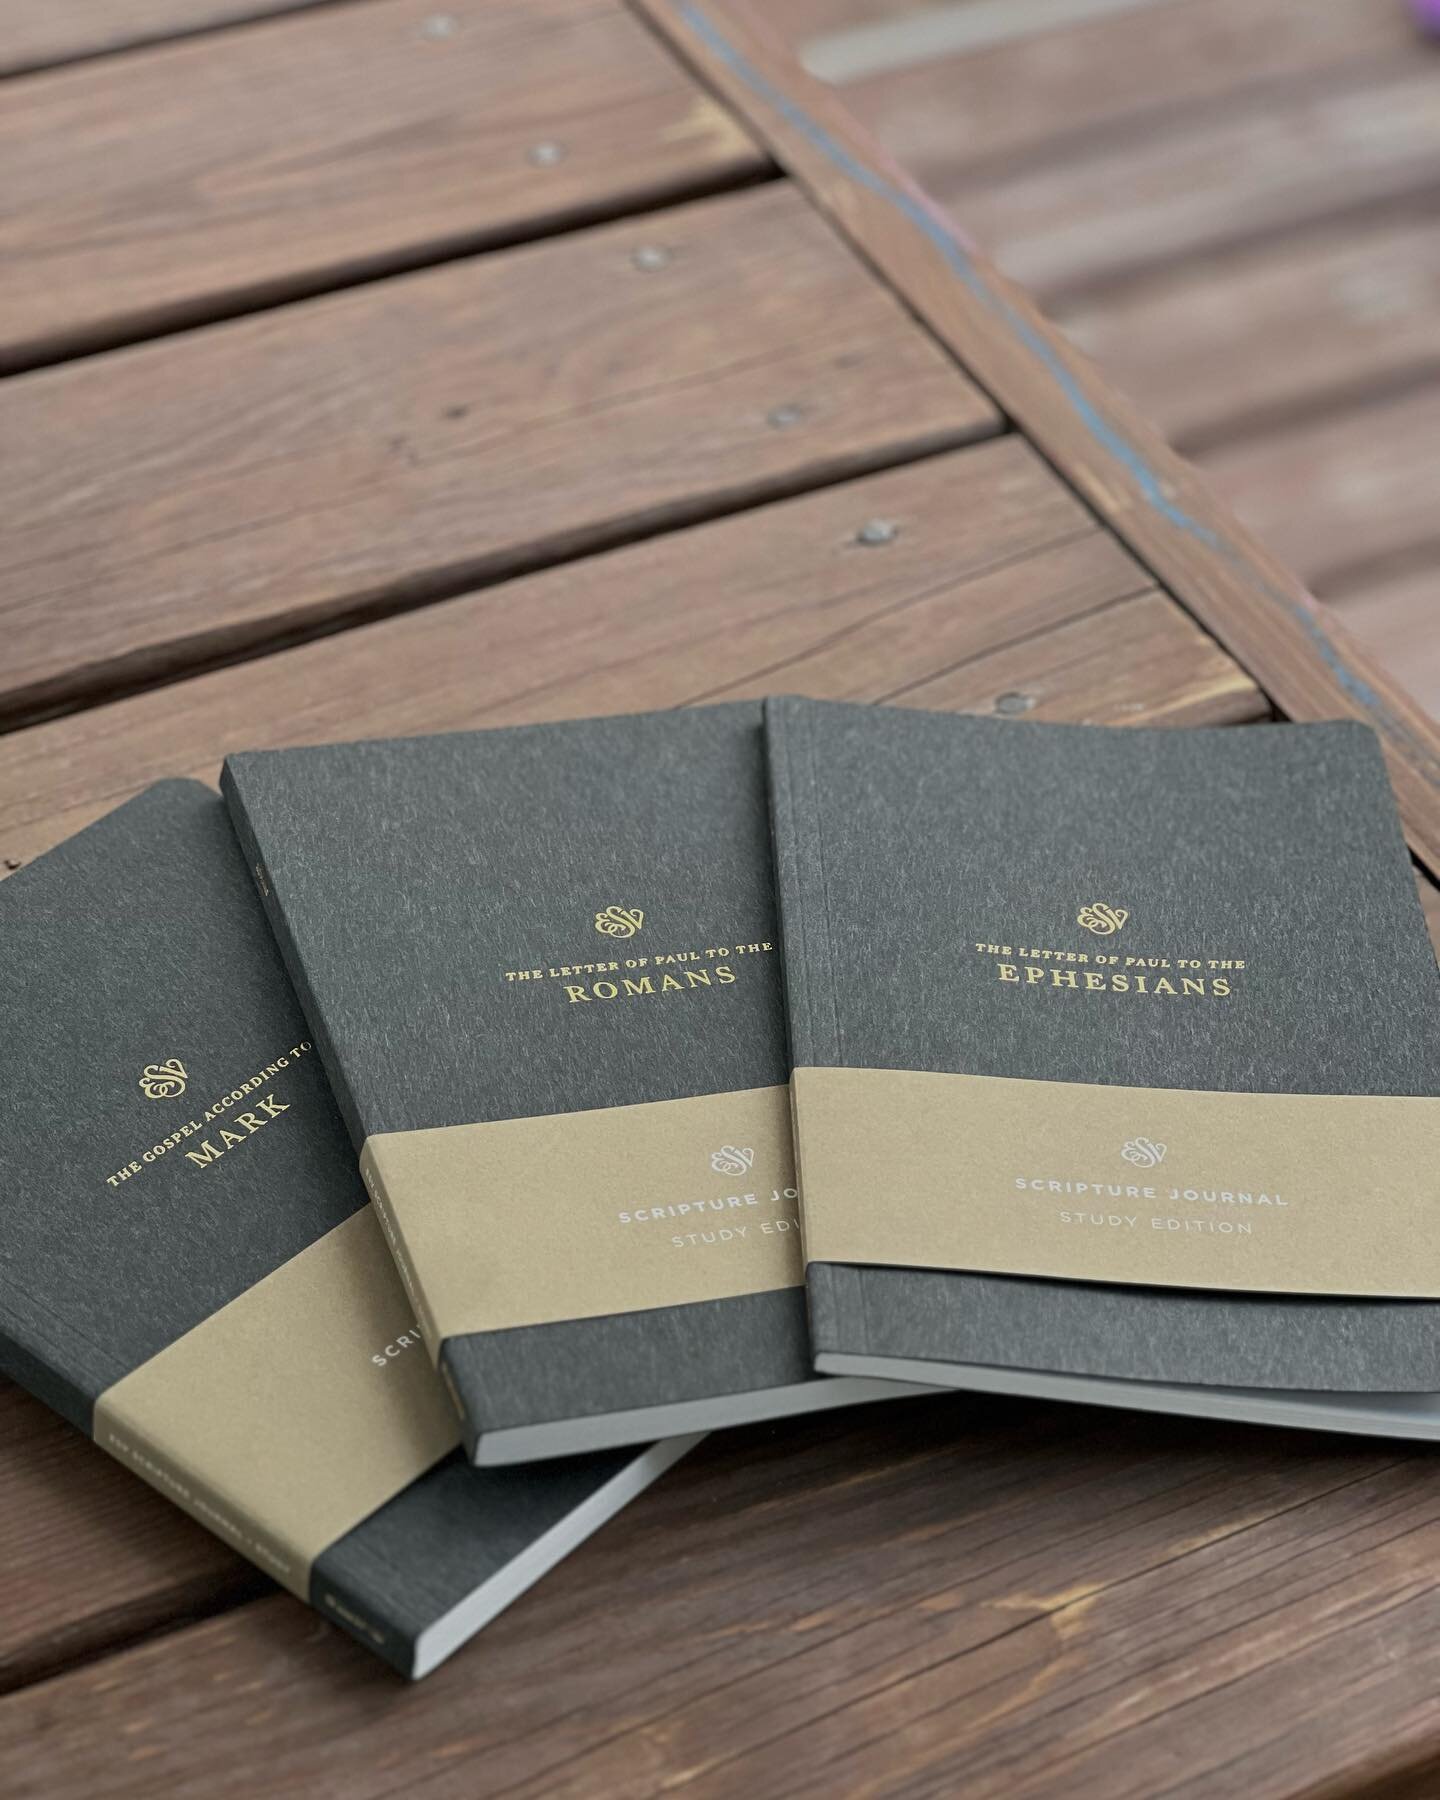 Excited for these new ESV Scripture Journal Study Editions that are releasing soon from @crosswaybooks.